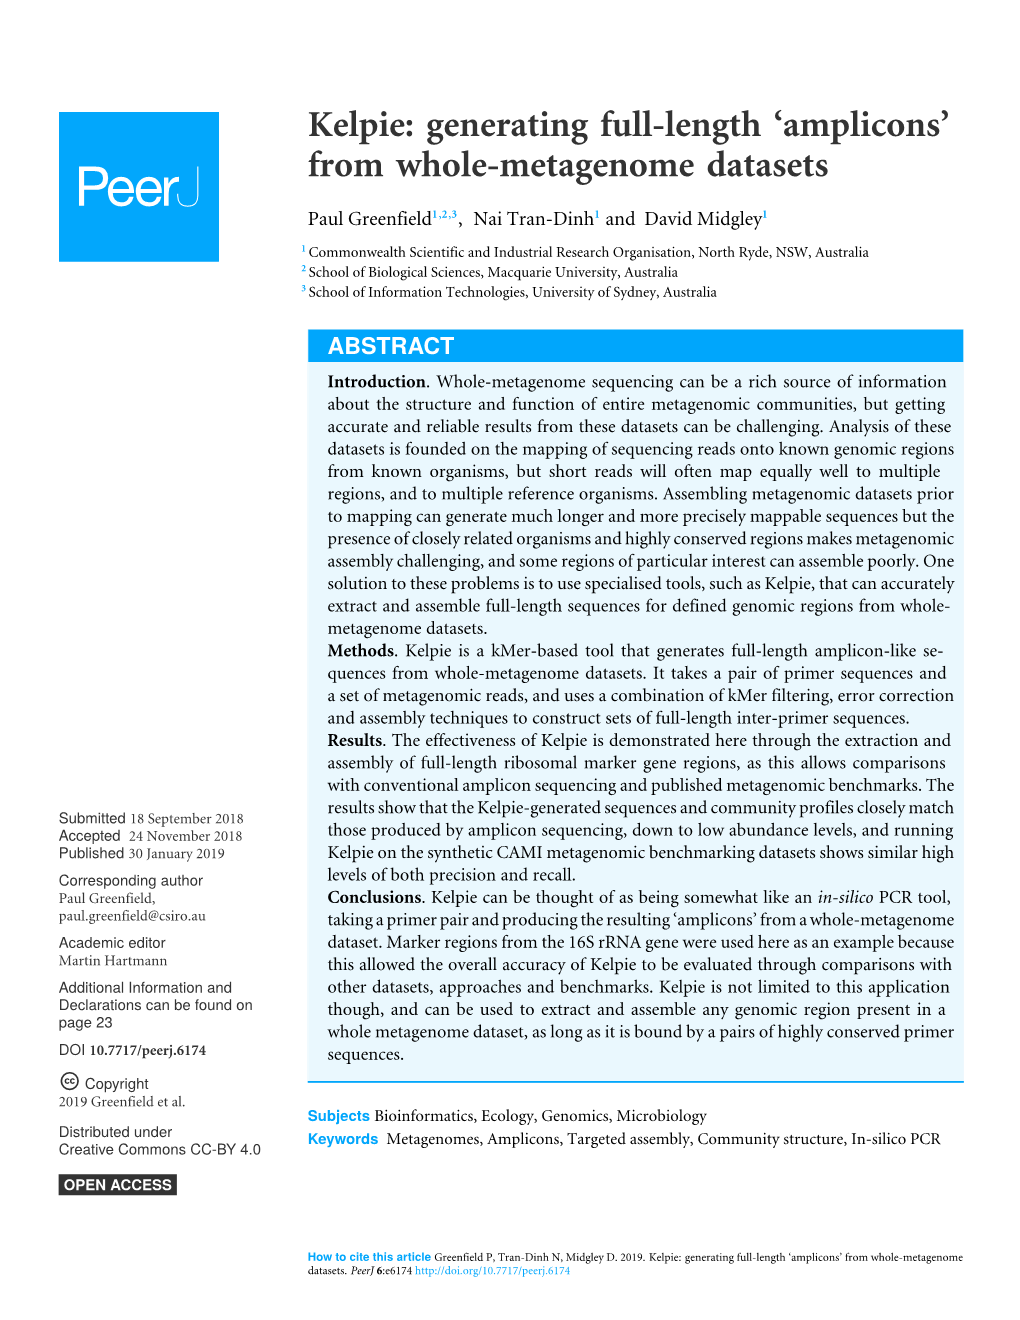 Amplicons’ from Whole-Metagenome Datasets